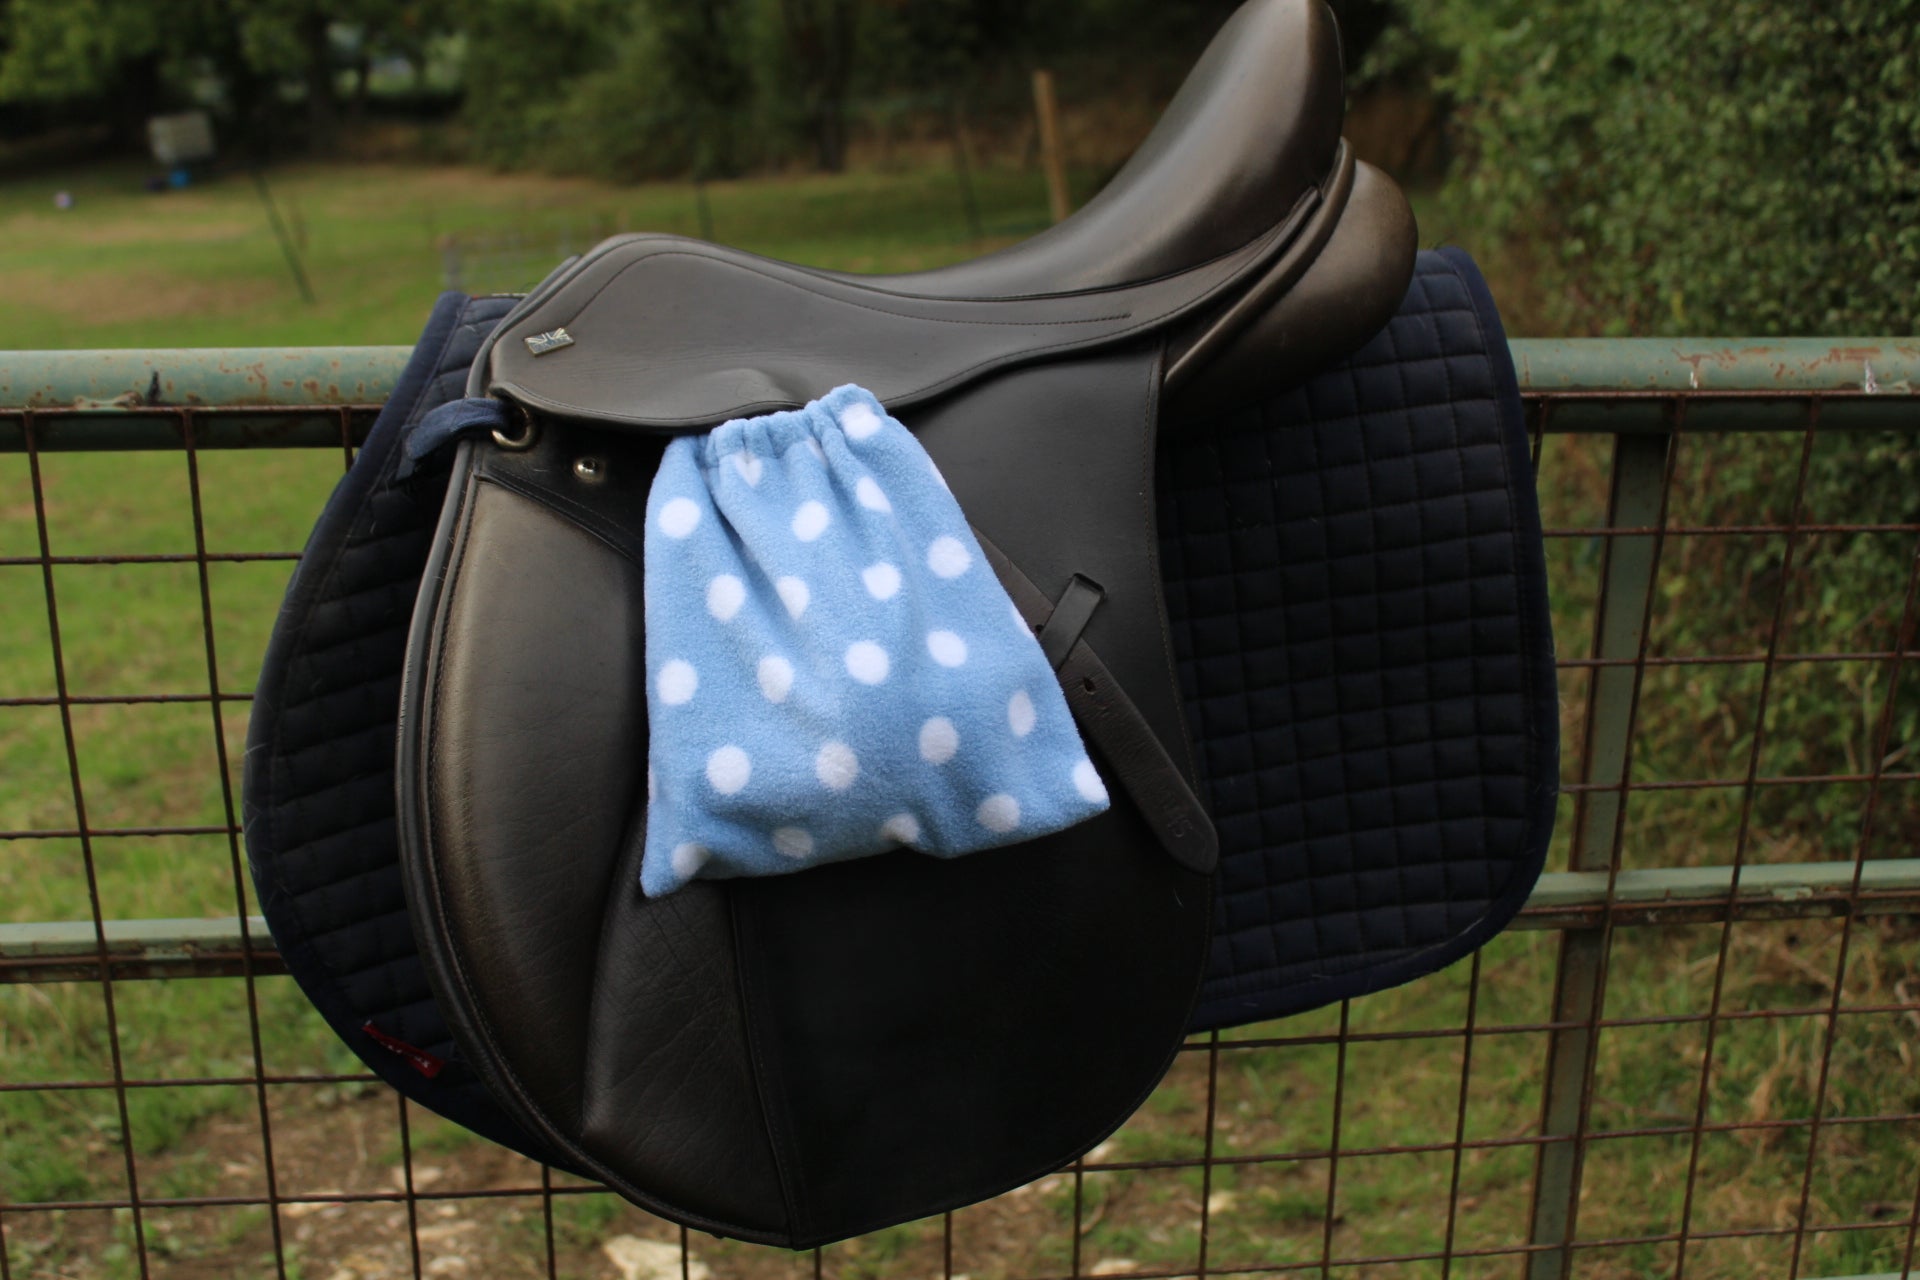 light blue stirrup covers with white spots on them, on a brown monarch saddle which has a navy le Mieux saddle pad under, on a field fence